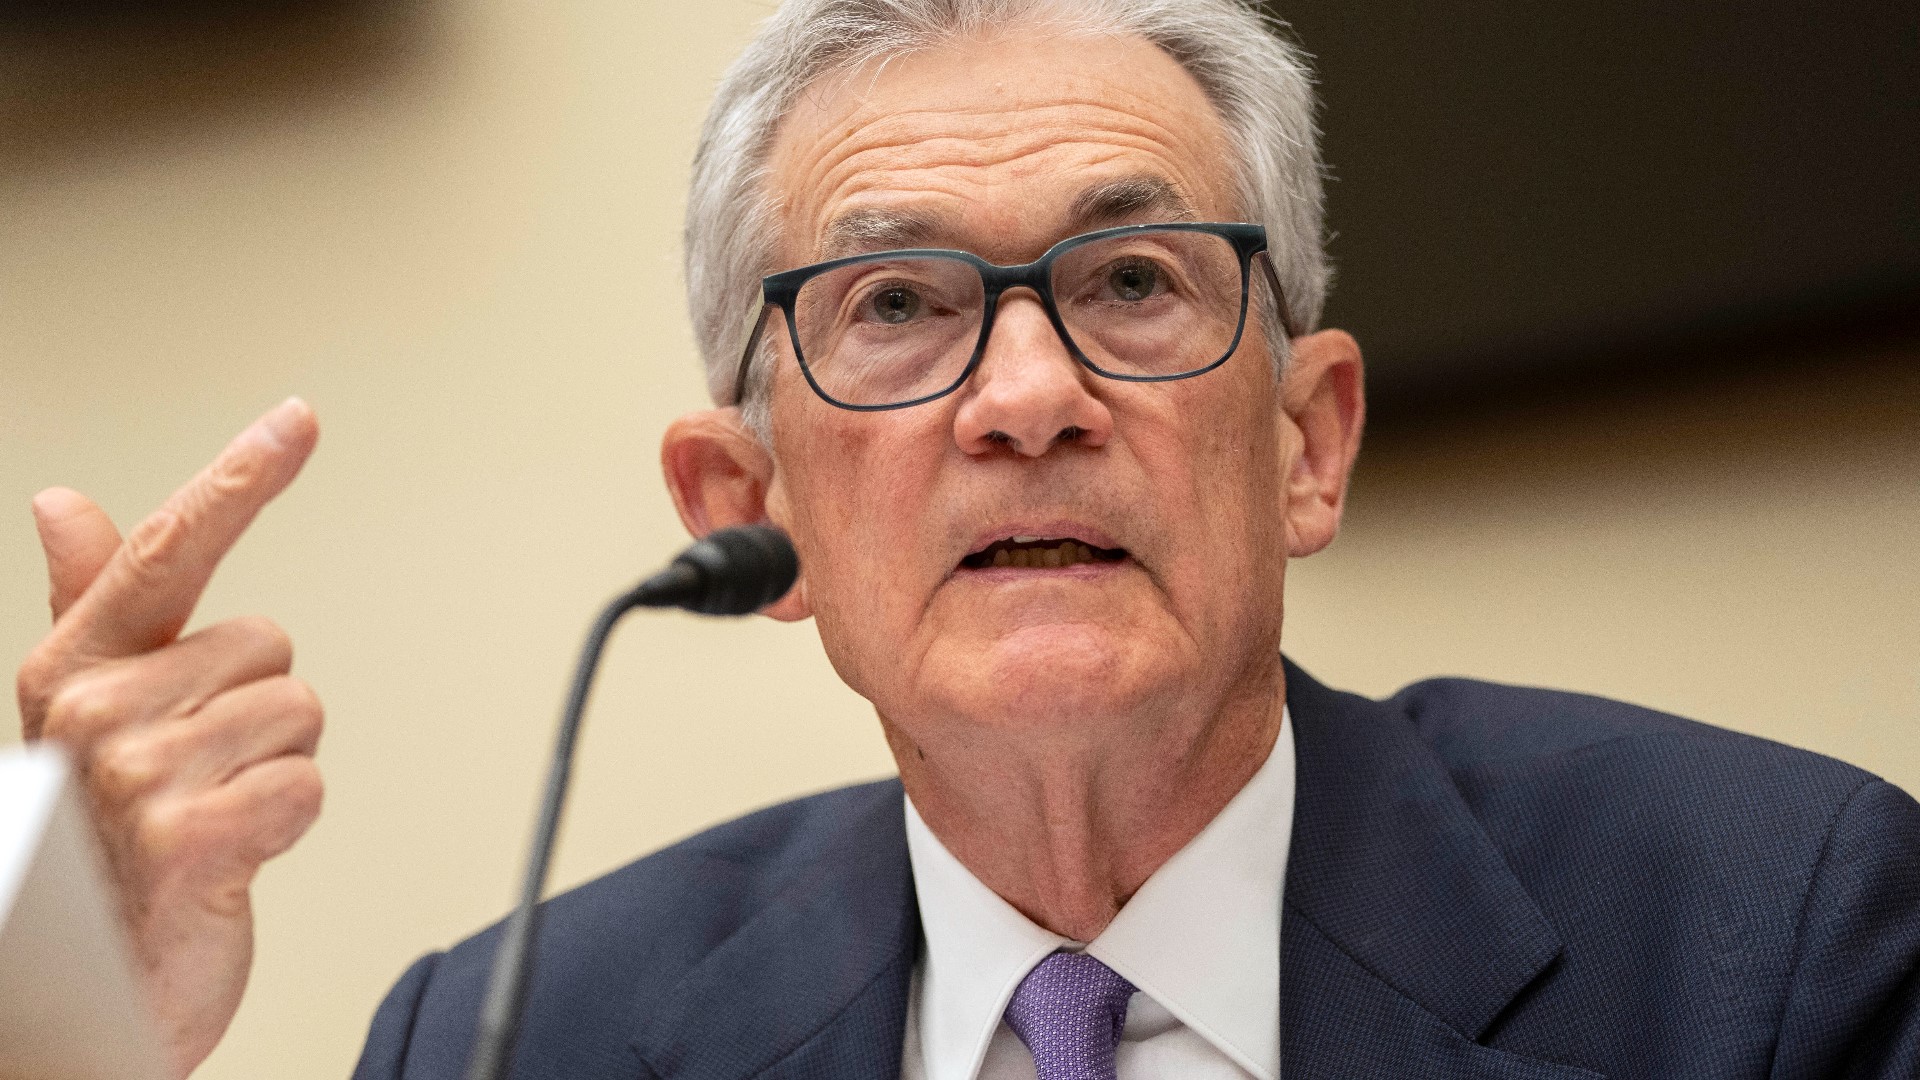 The Fed kept their benchmark rate unchanged for a fifth straight time, but warned of changes in the future that may impact loan rates.